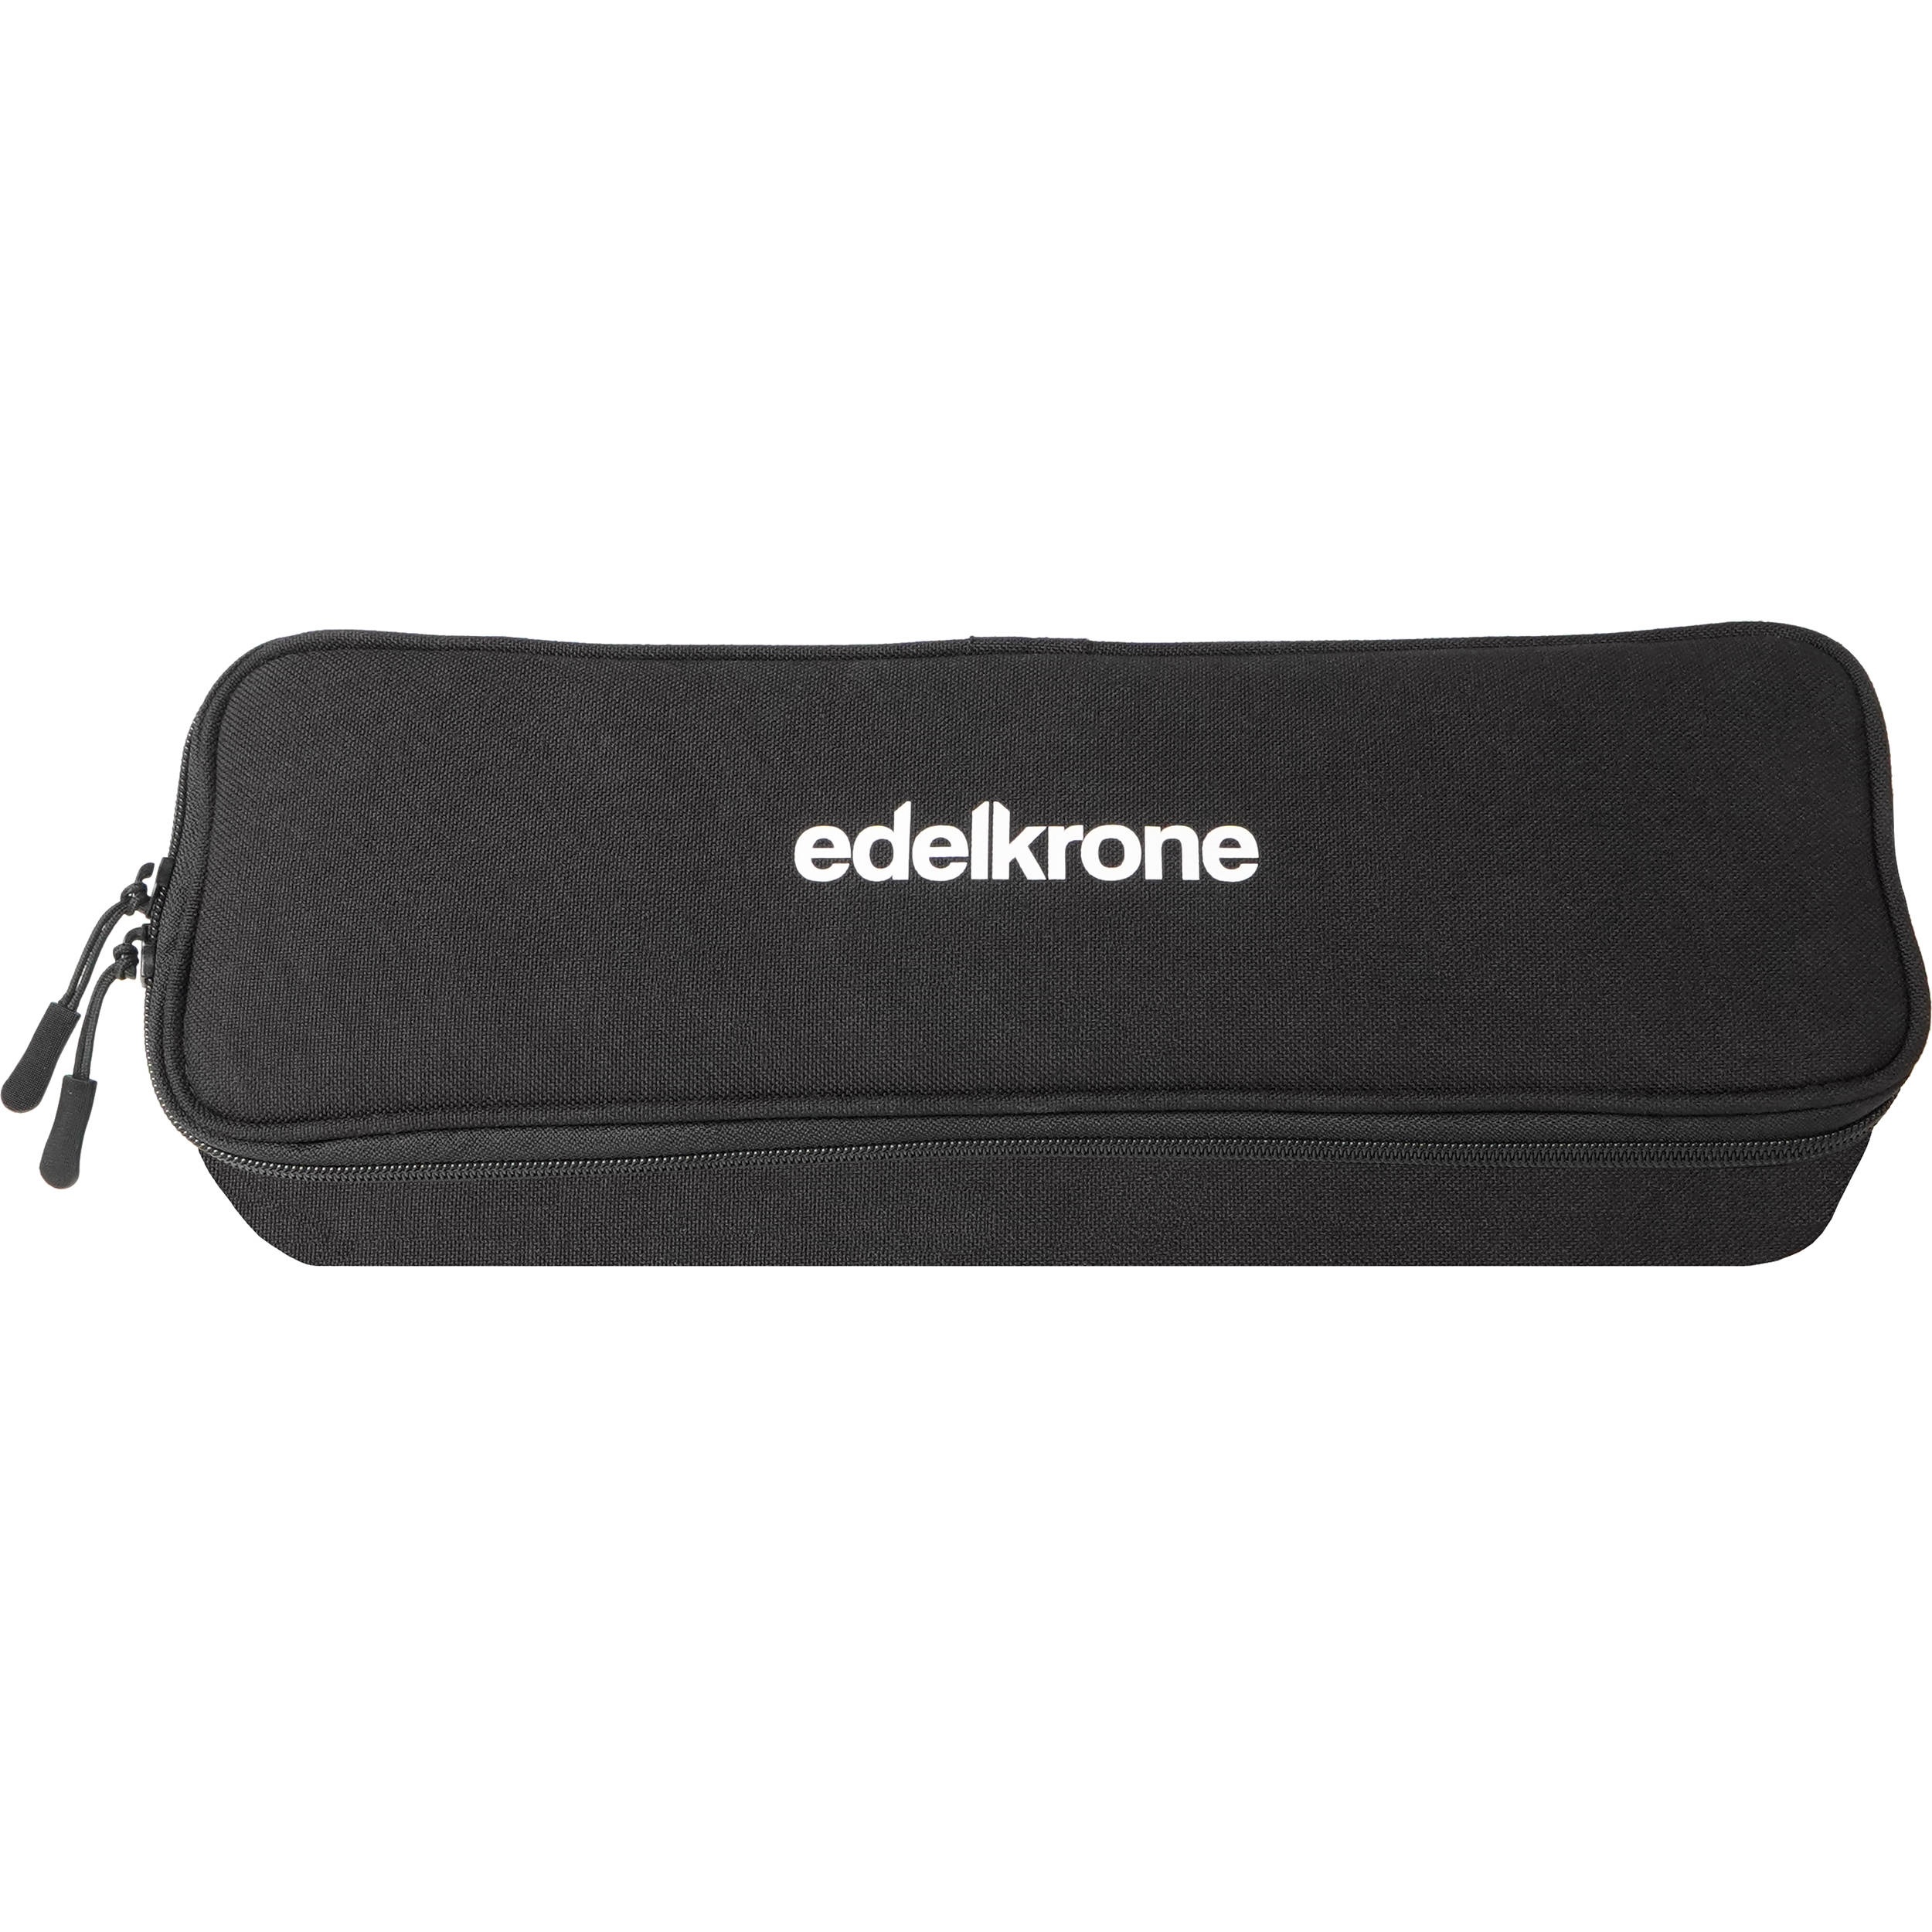 edelkrone Soft Case for SliderPLUS Compact